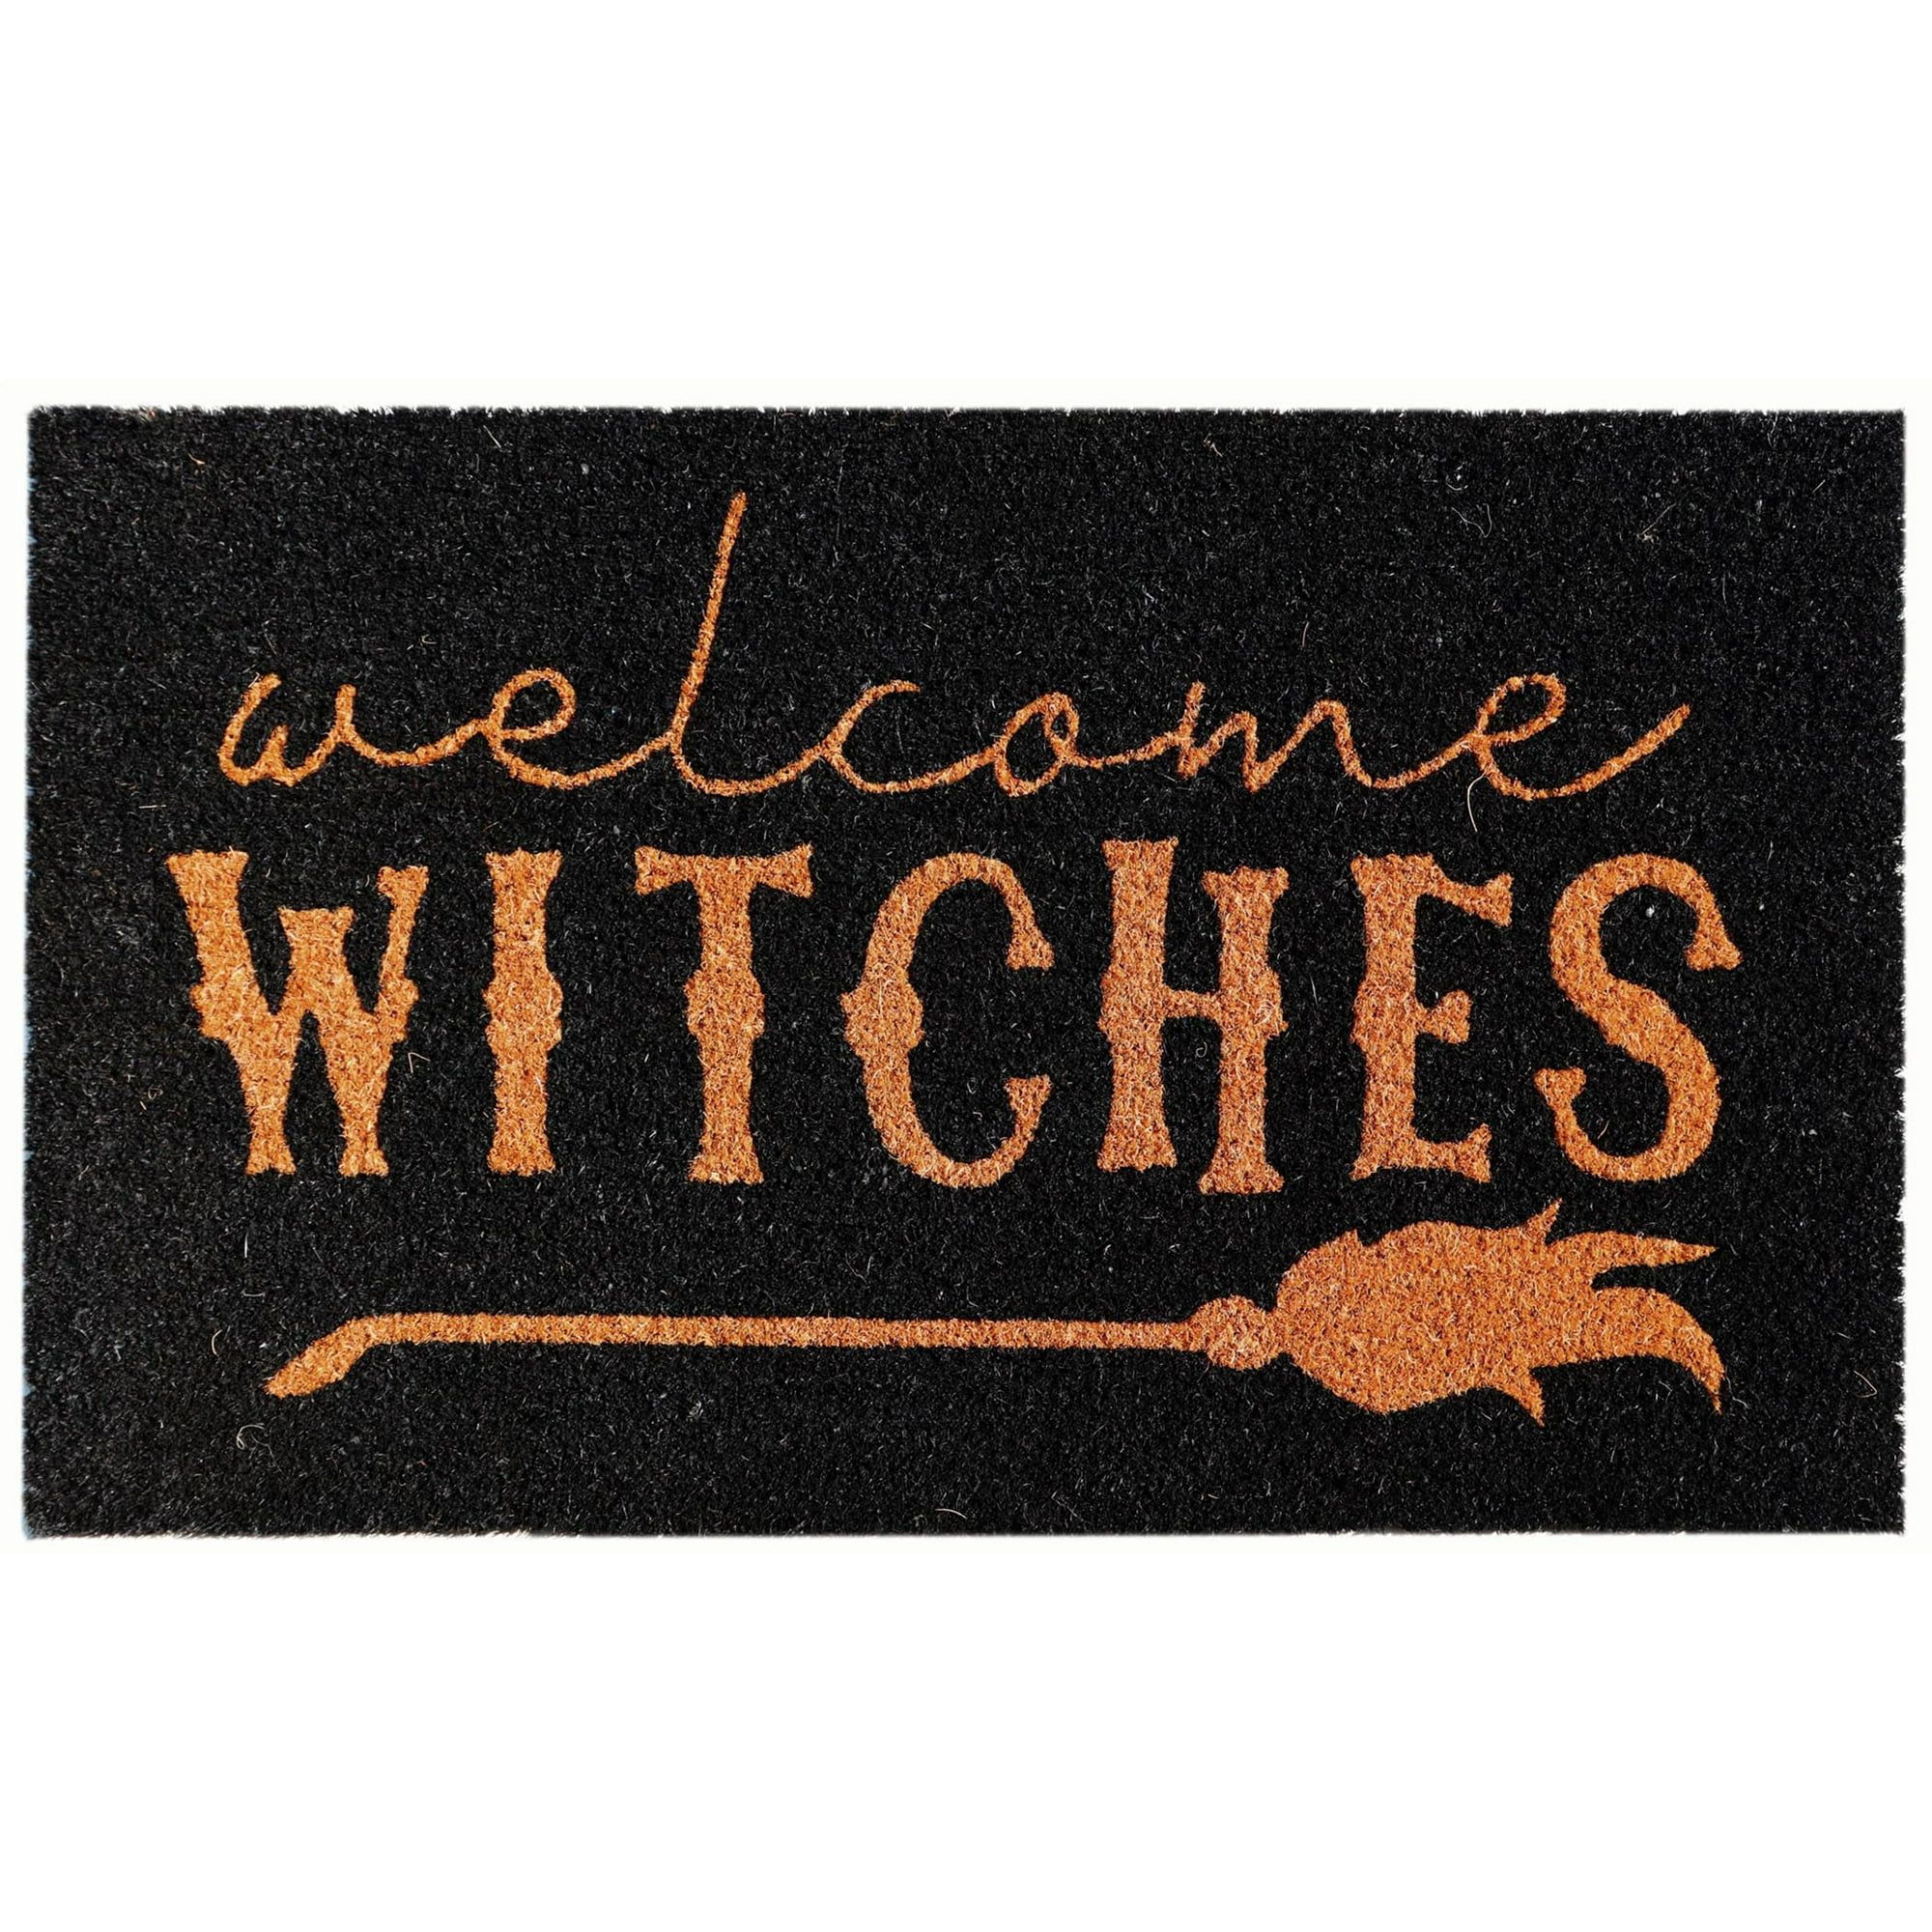 Halloween Outdoor Entryway Coir Mat, "Welcome Witches", 18 in x 30 in, by Way To Celebrate | Walmart (US)